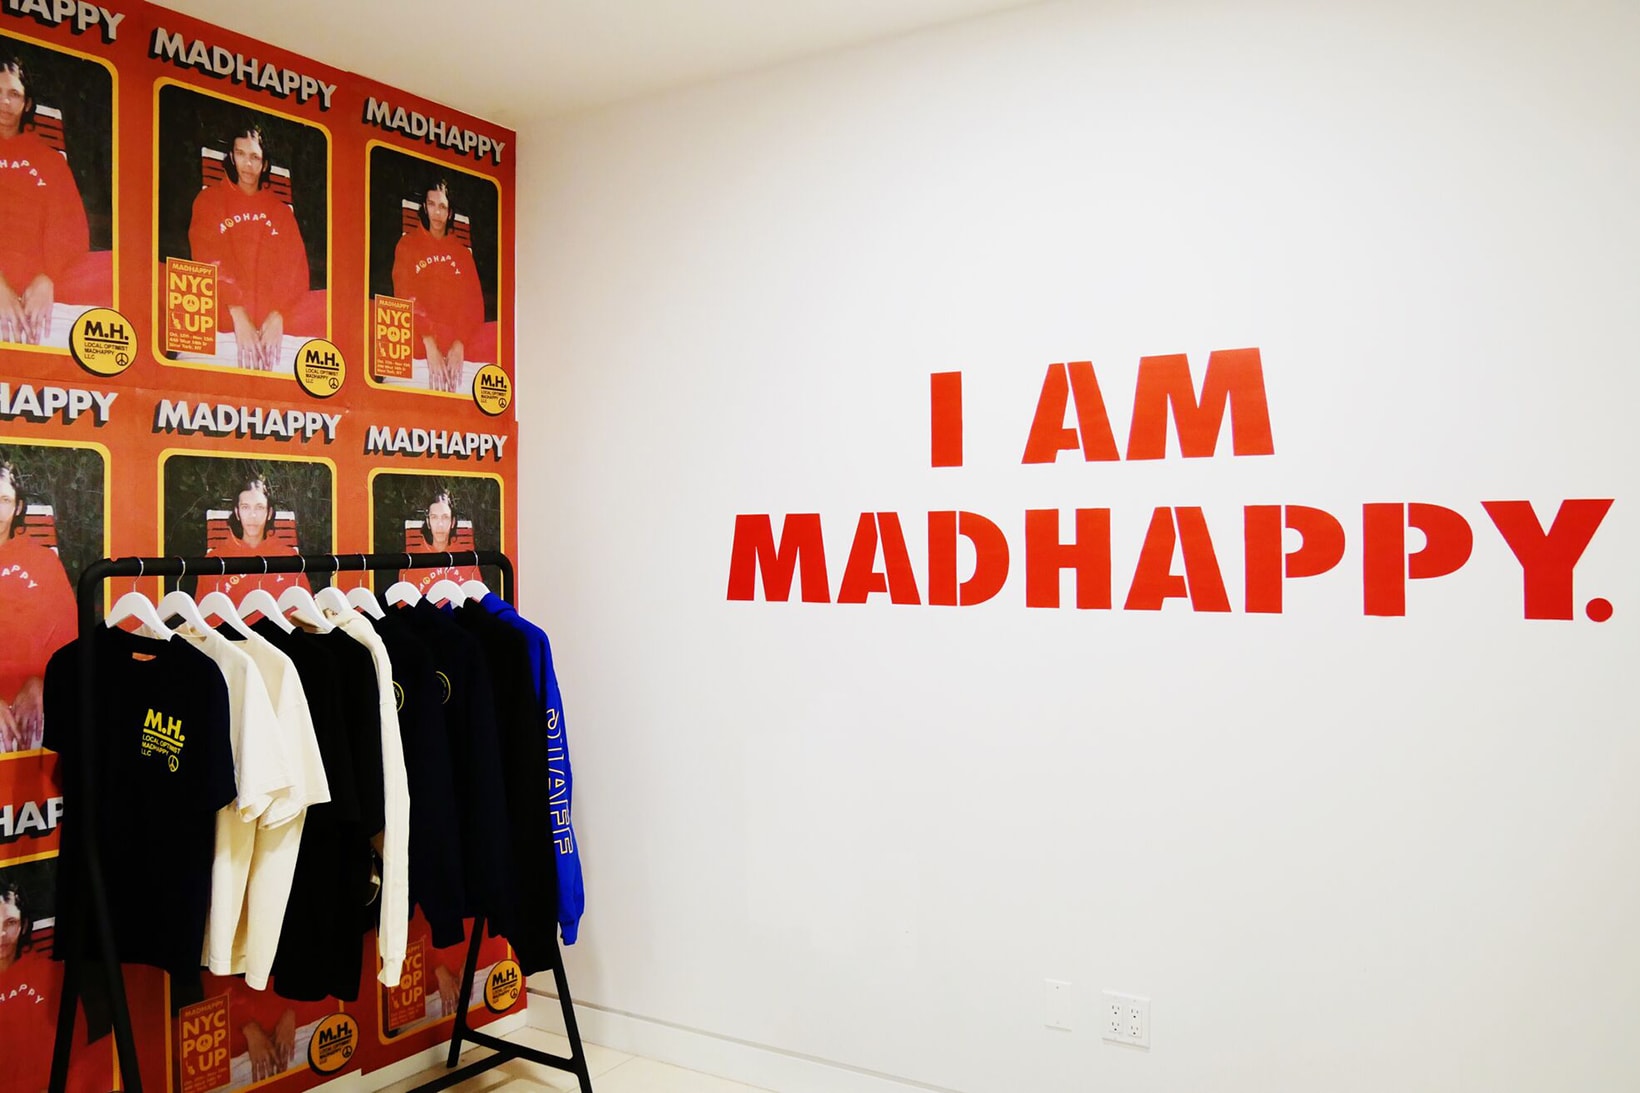 MADHAPPY Pop-Up California NYC 2017 October